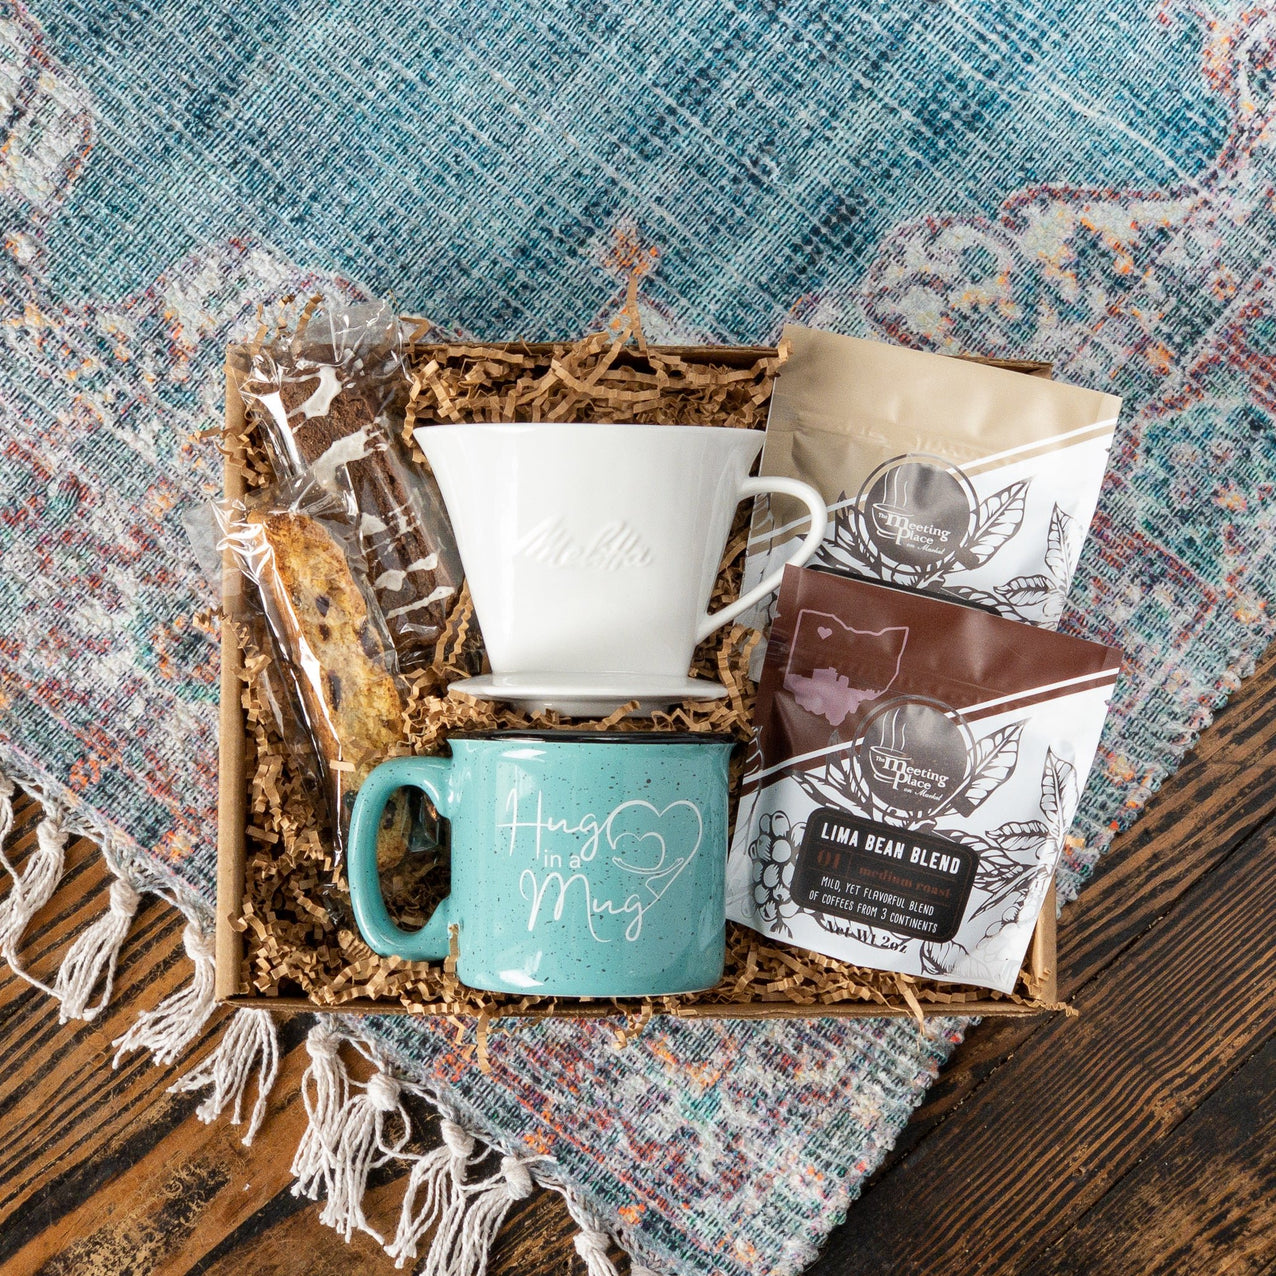 Hug in a Mug Pour Over Coffee Gift Basket Pour Over Gift Set - The Meeting Place on Market